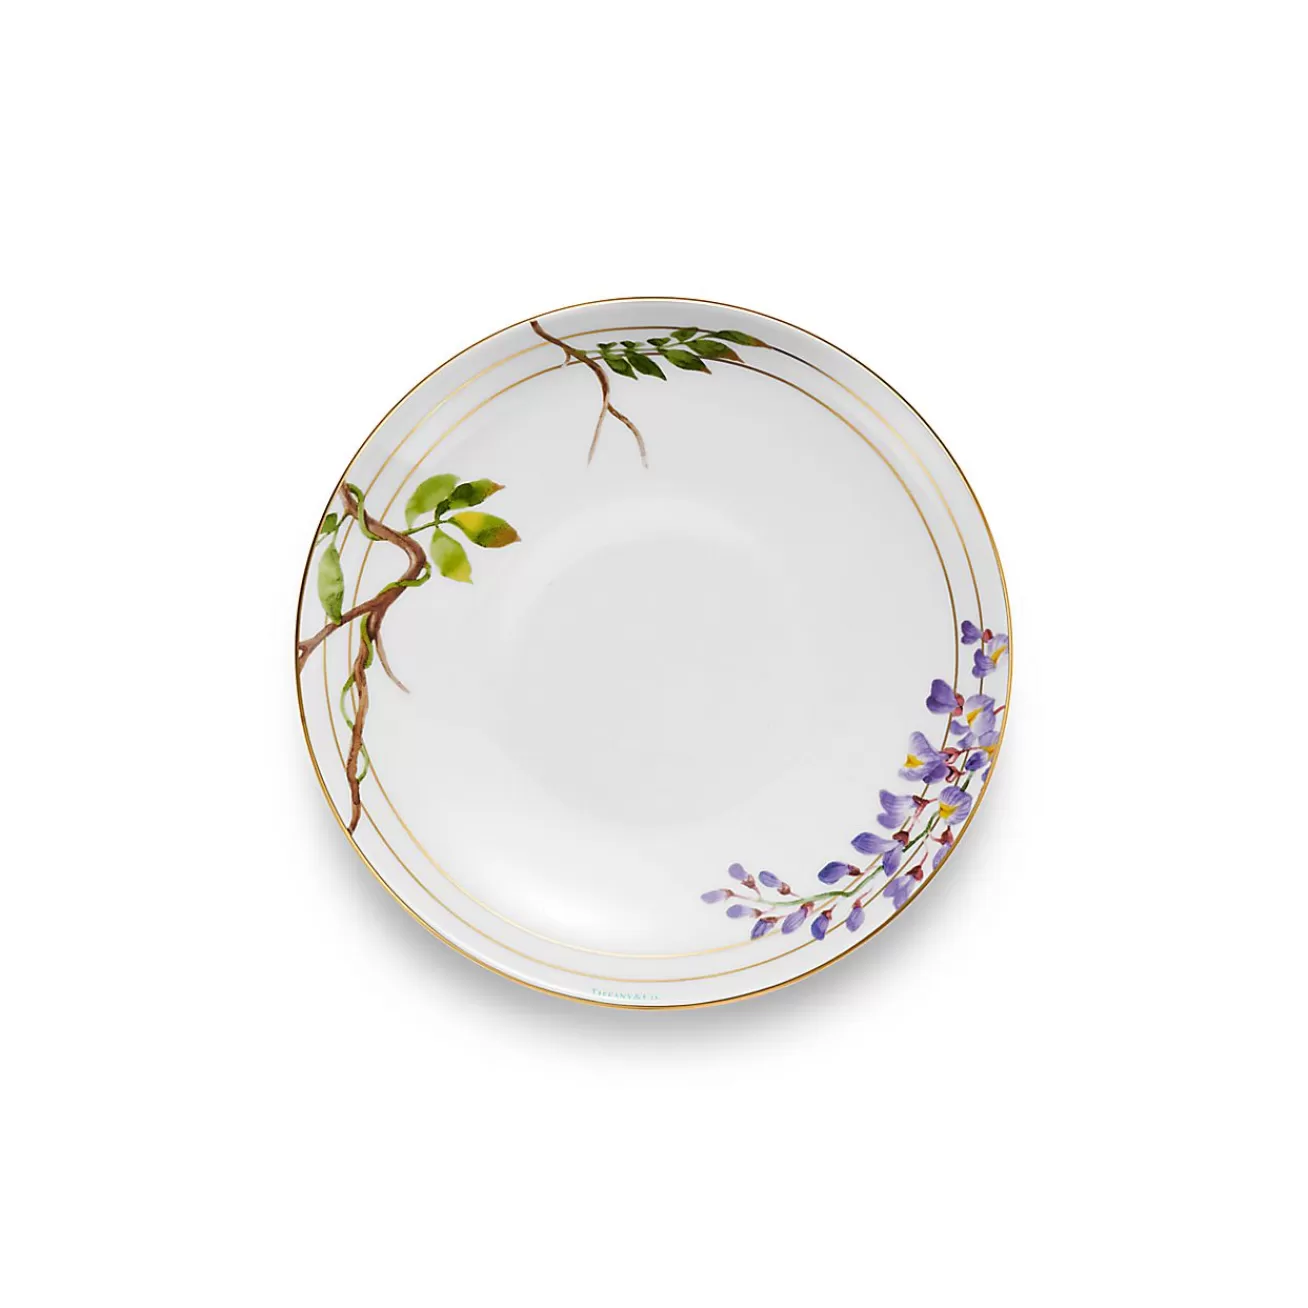 Tiffany & Co. Tiffany Wisteria Bread and Butter Plate in Porcelain | ^ Tableware